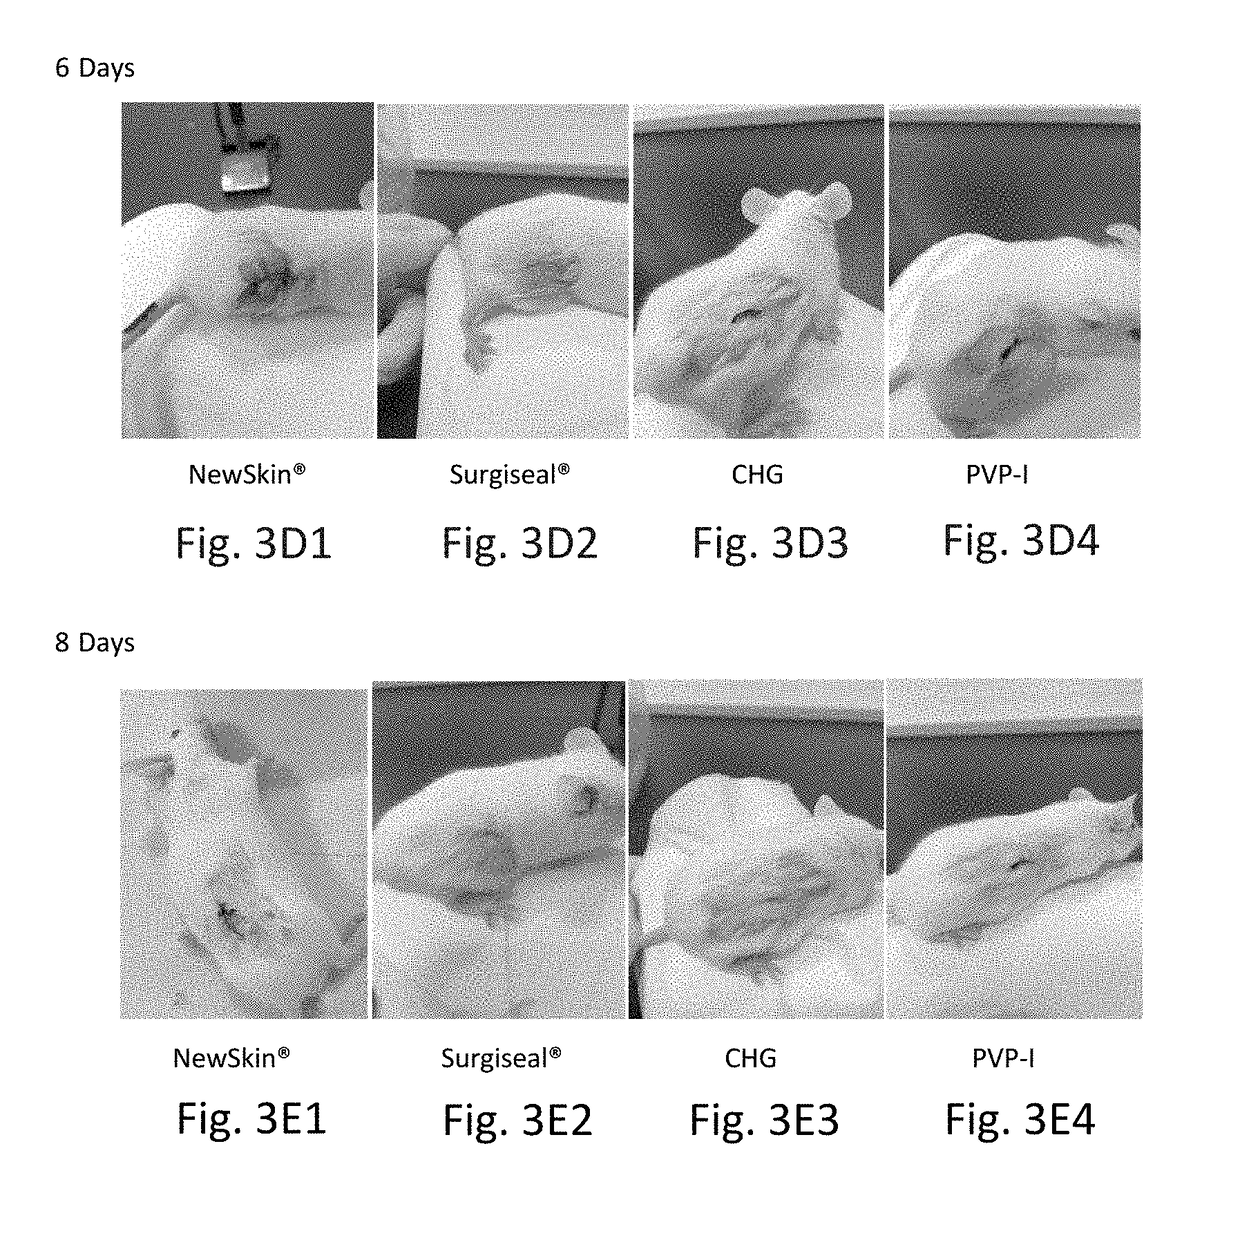 Novel rapid-deposition thin-film forming compositions as effective wound care treatment